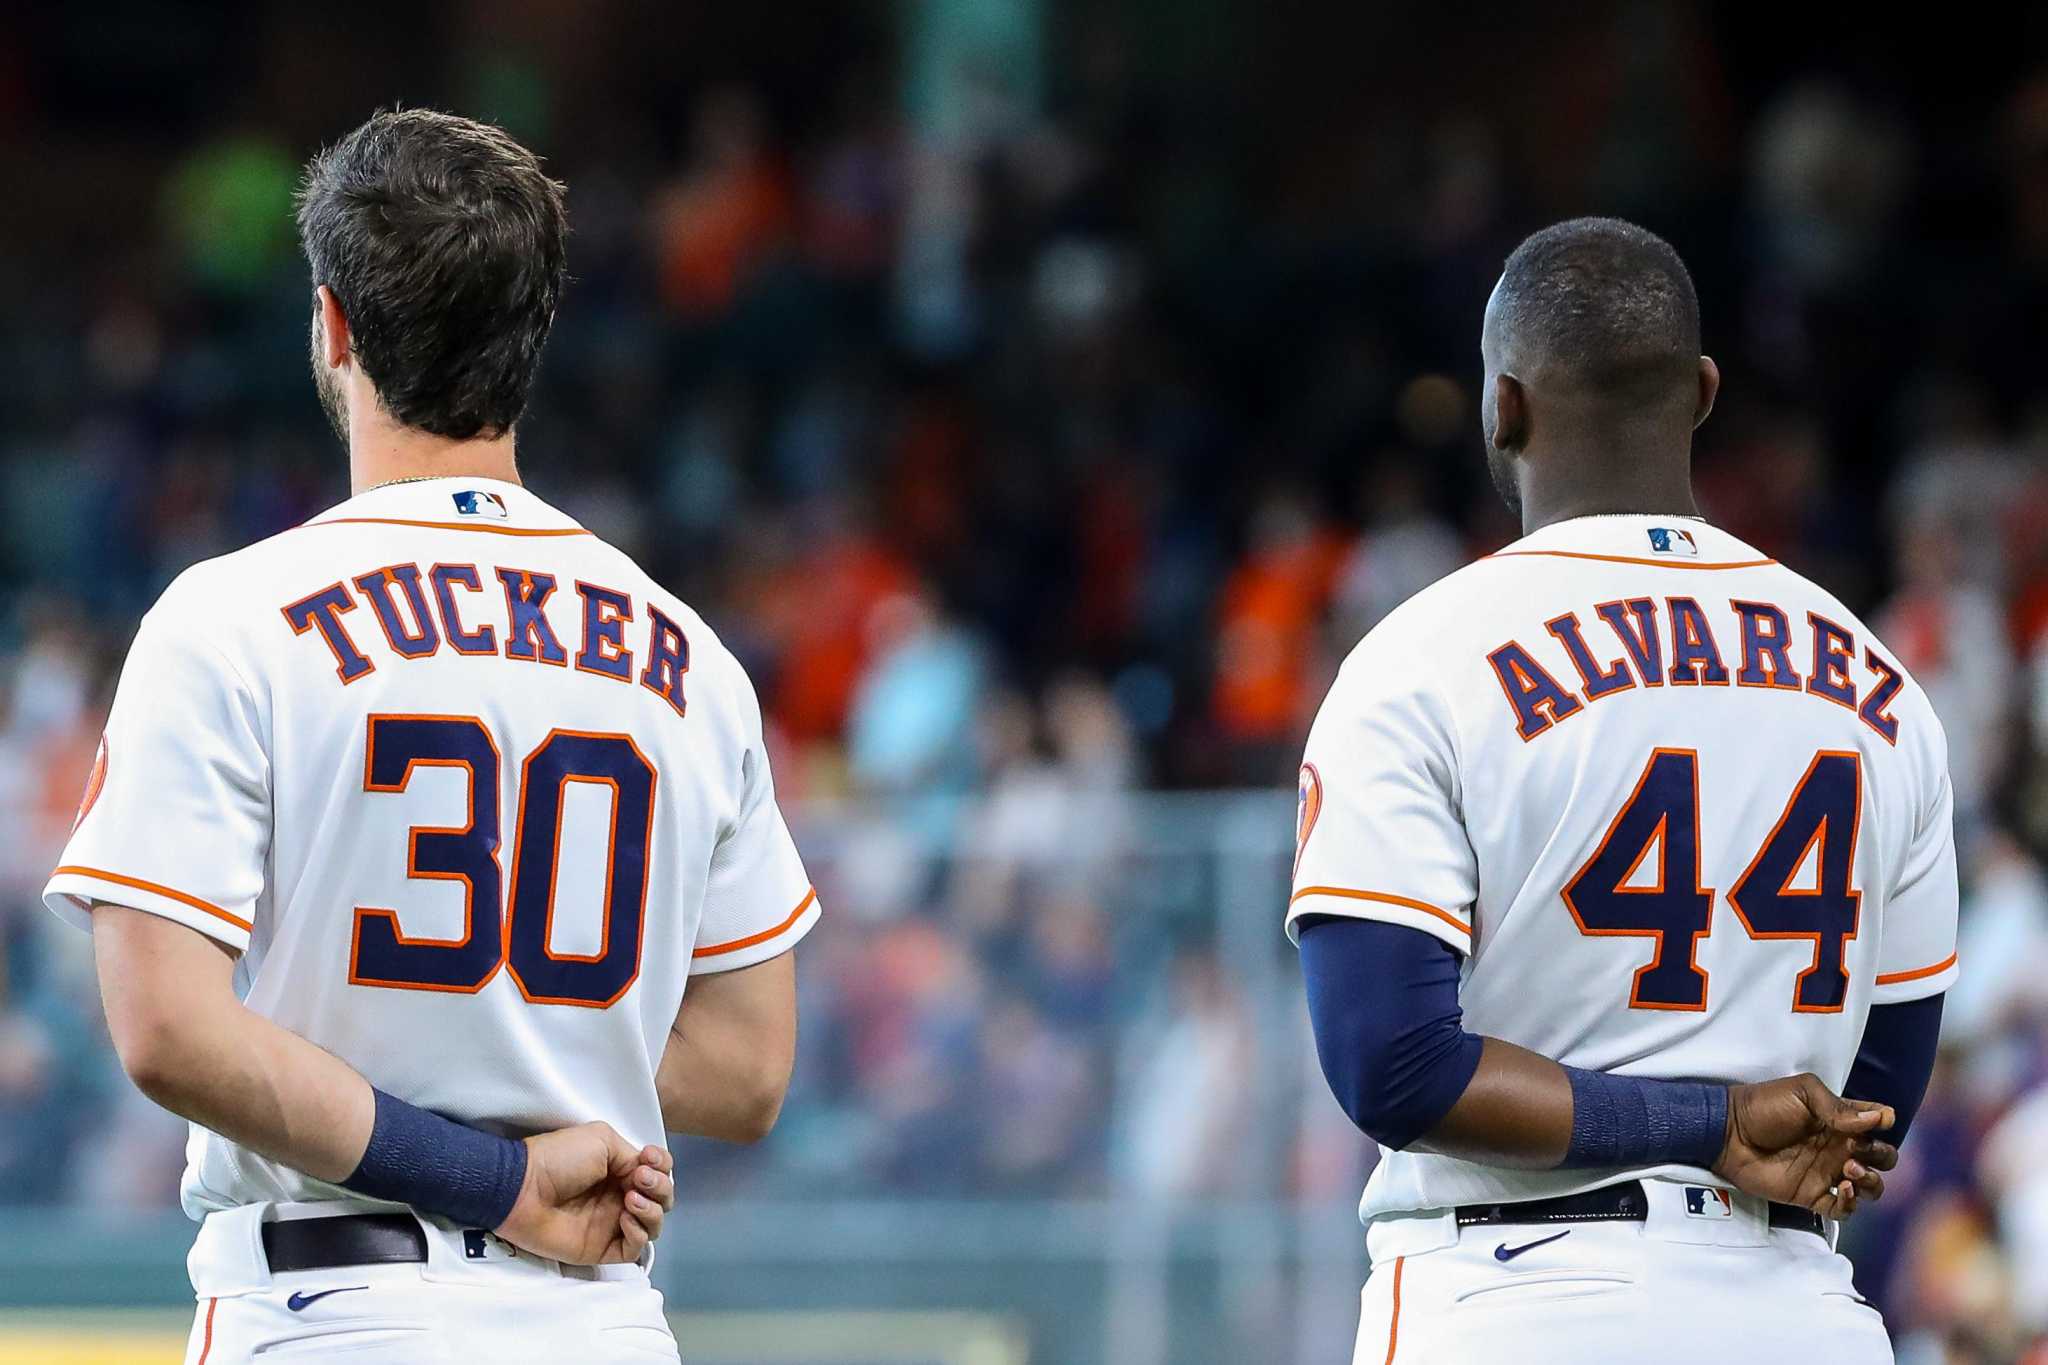 Altuve booed, nicked by pitch in spring debut for Astros